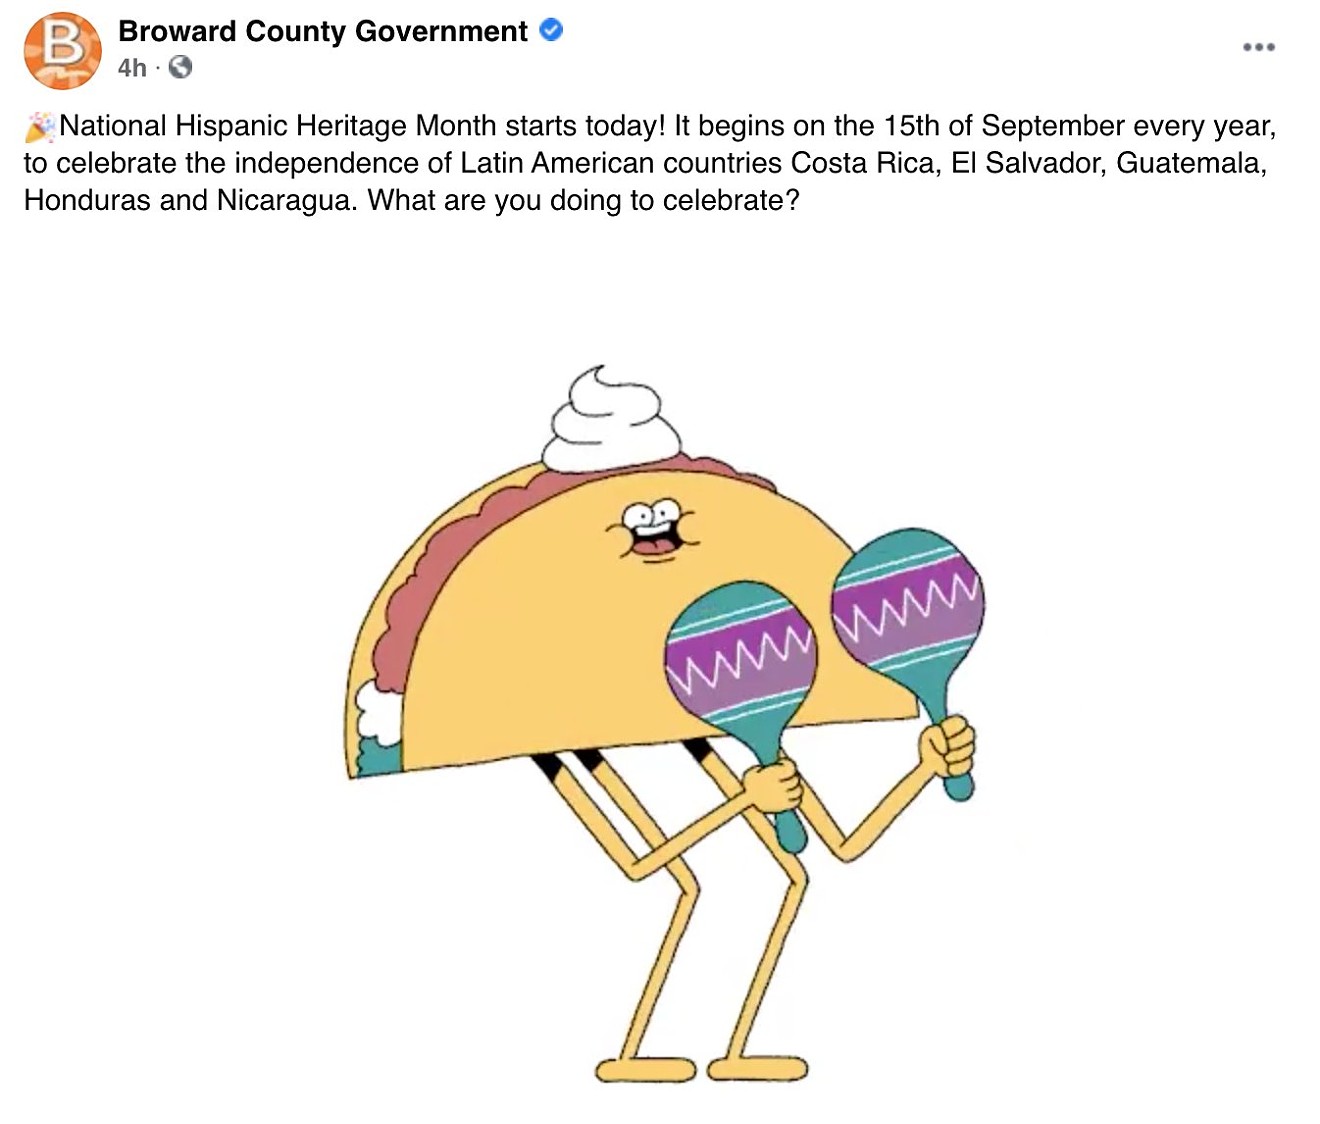 On the first day of Hispanic Heritage Month, the Broward County Government pages on Twitter and Facebook posted an ethnically insensitive gif, inviting ire from South Florida Latinos.